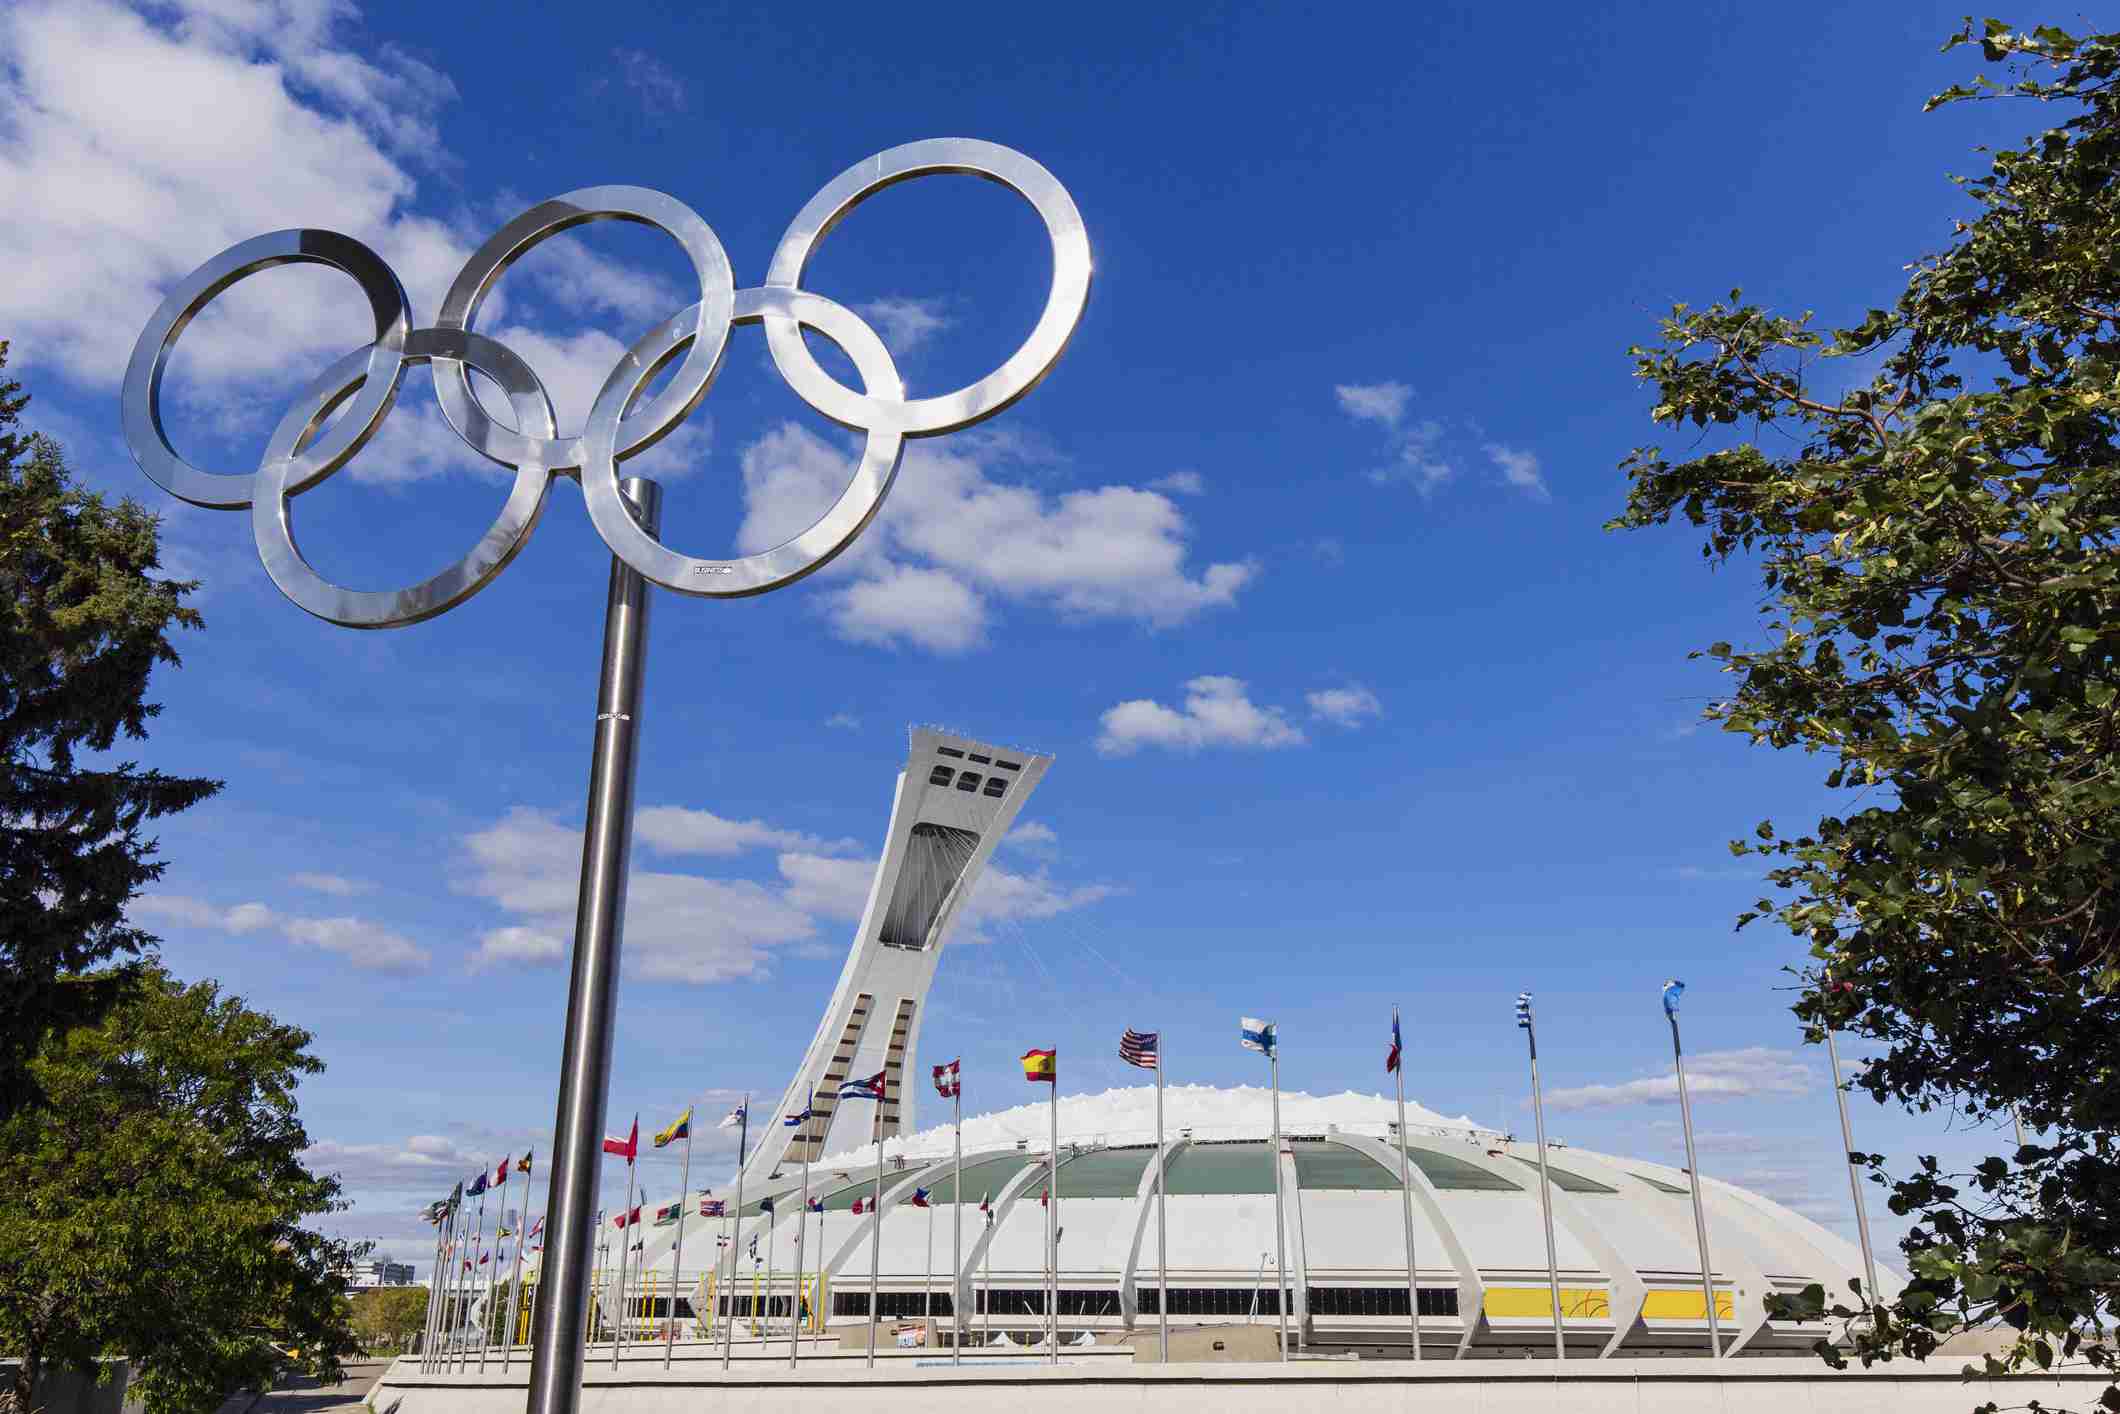 Montreal, Olympic Park, the Olympic rings and the stadium dating from the Summer Olympics 1976